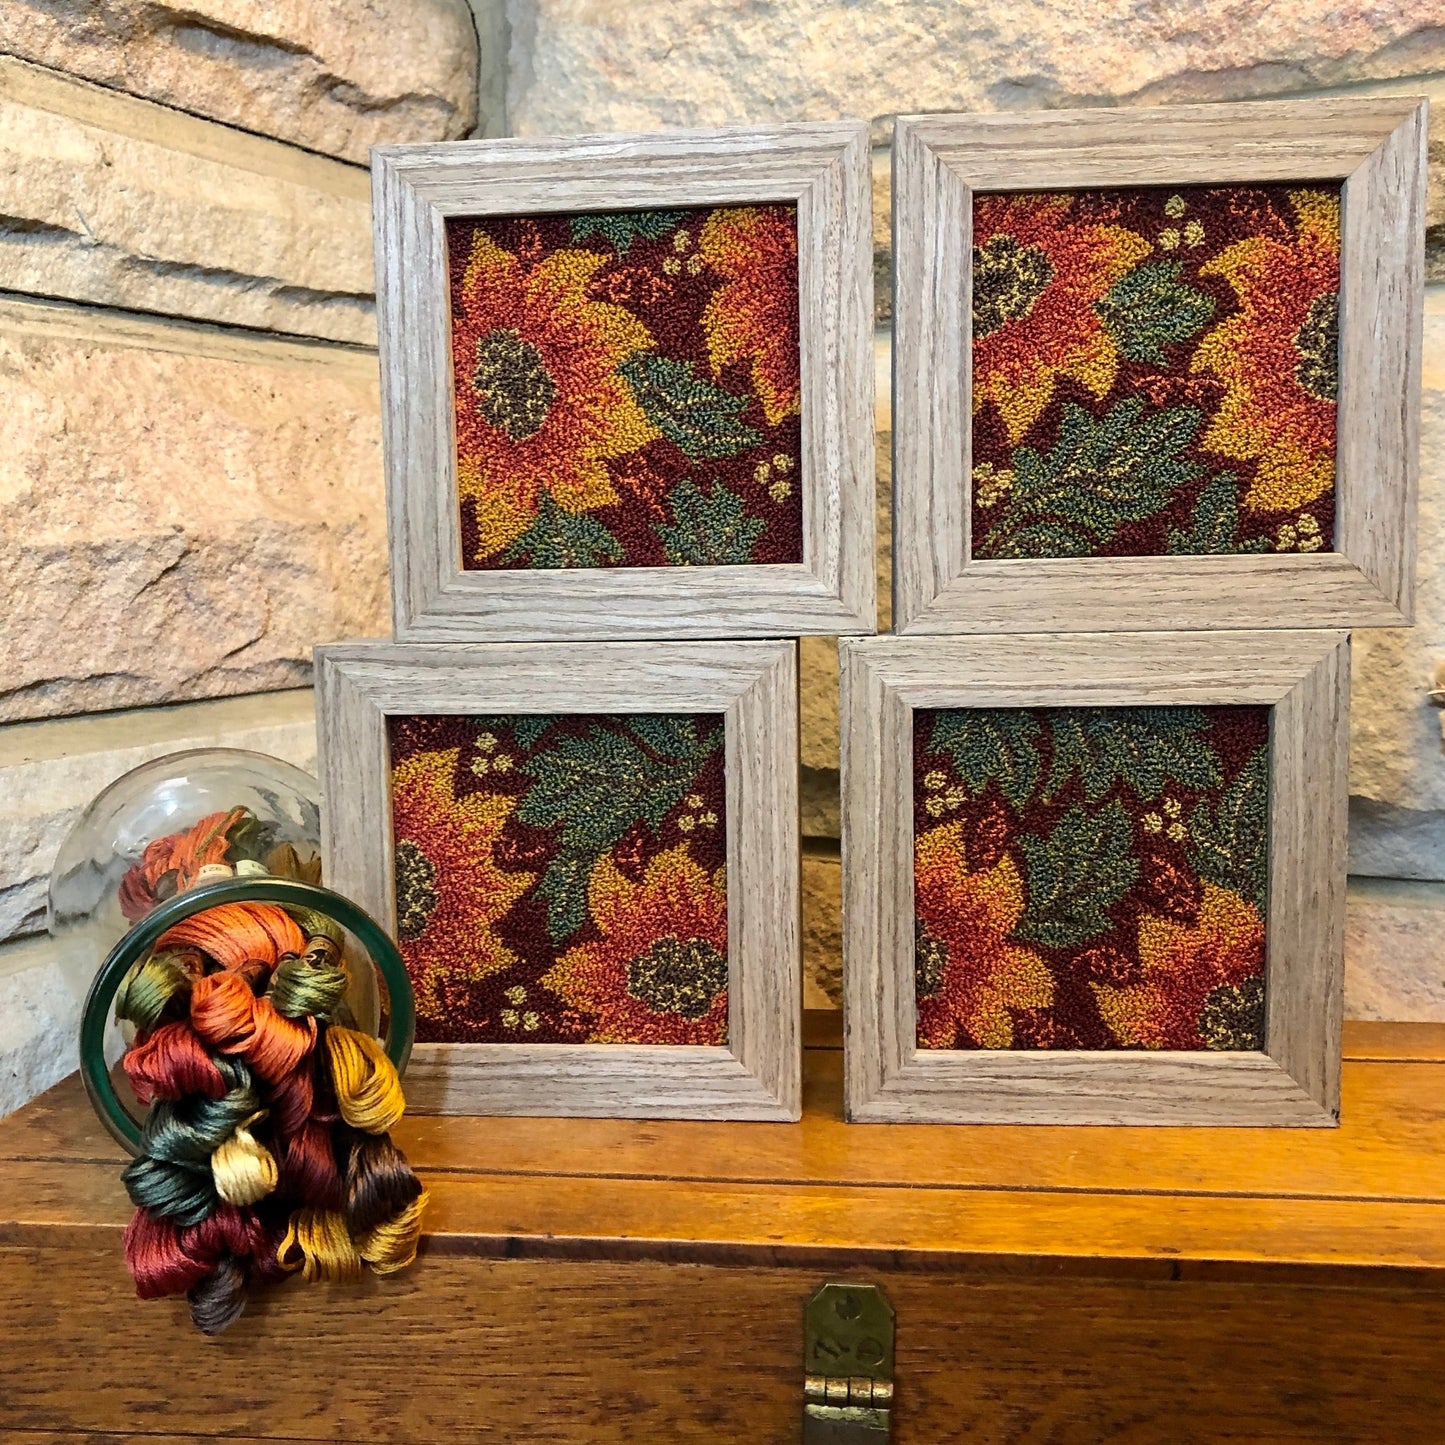 Autumn Glow- Punch Needle Pattern (set of 4) with DMC thread Kit by Orphaned Wool. This is a lovely set of 4 punch needle pattern designed to fit into a 4 x 4 frames. Copyright 2021 Kelly Kanyok- All Rights Reserved.